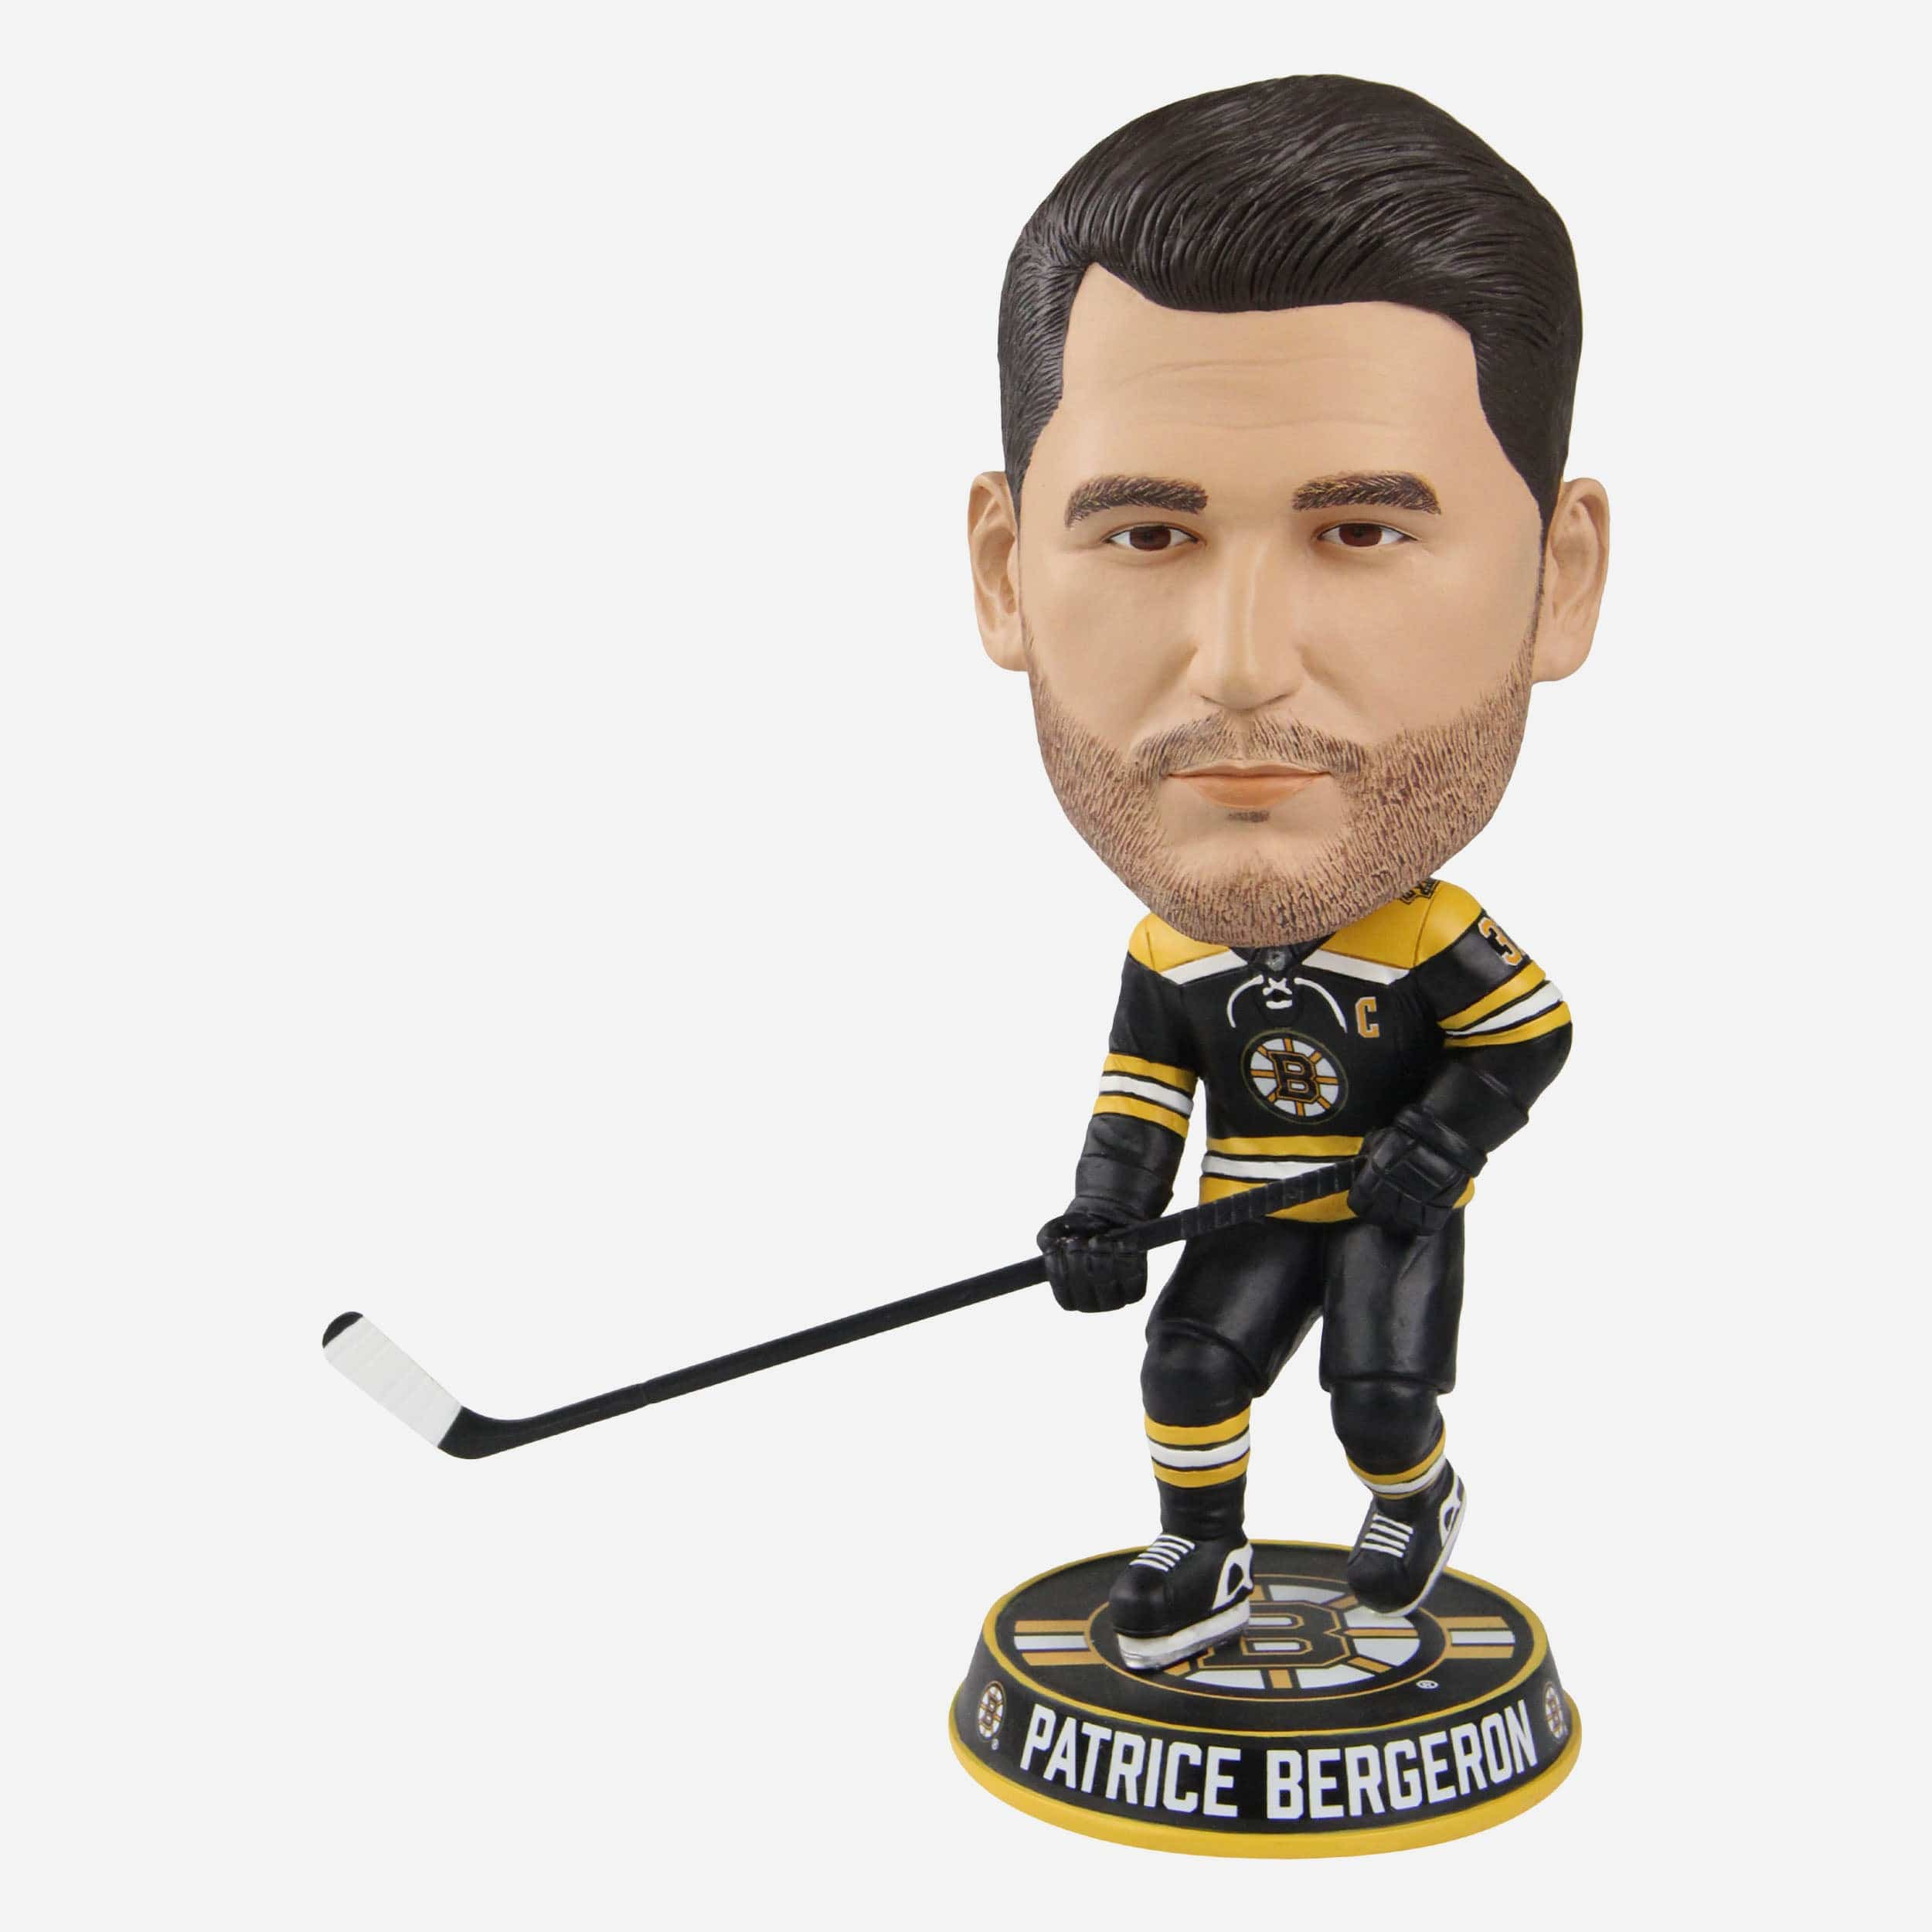 Boston Bruins All-Star Bobbles on Parade Bobblehead Officially Licensed by NHL